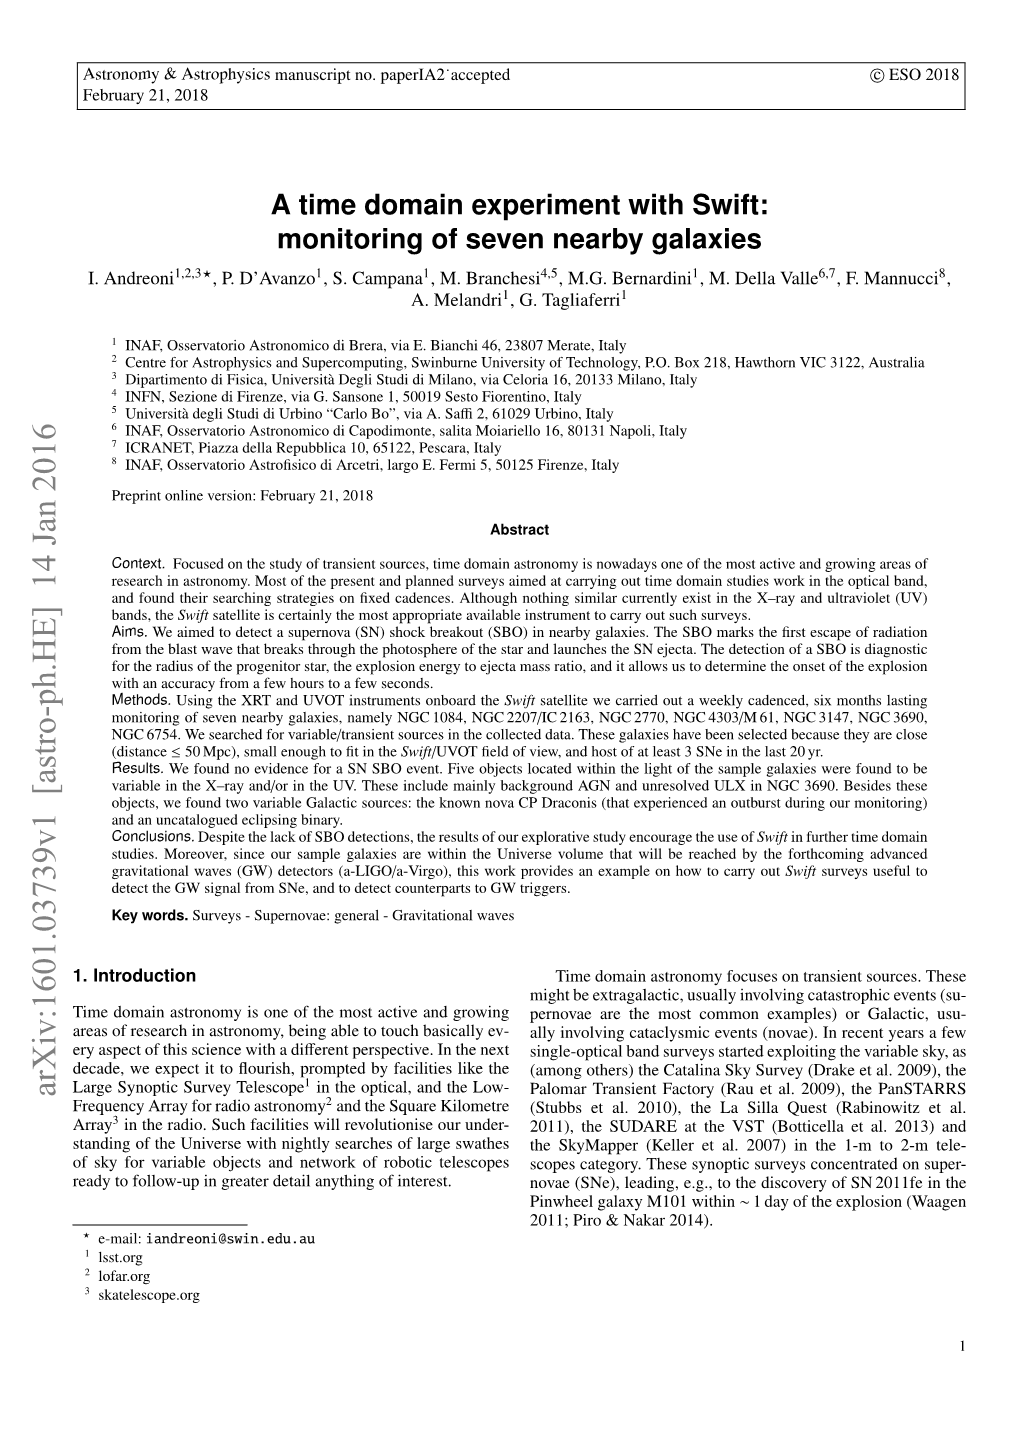 A Time Domain Experiment with Swift: Monitoring of Seven Nearby Galaxies I